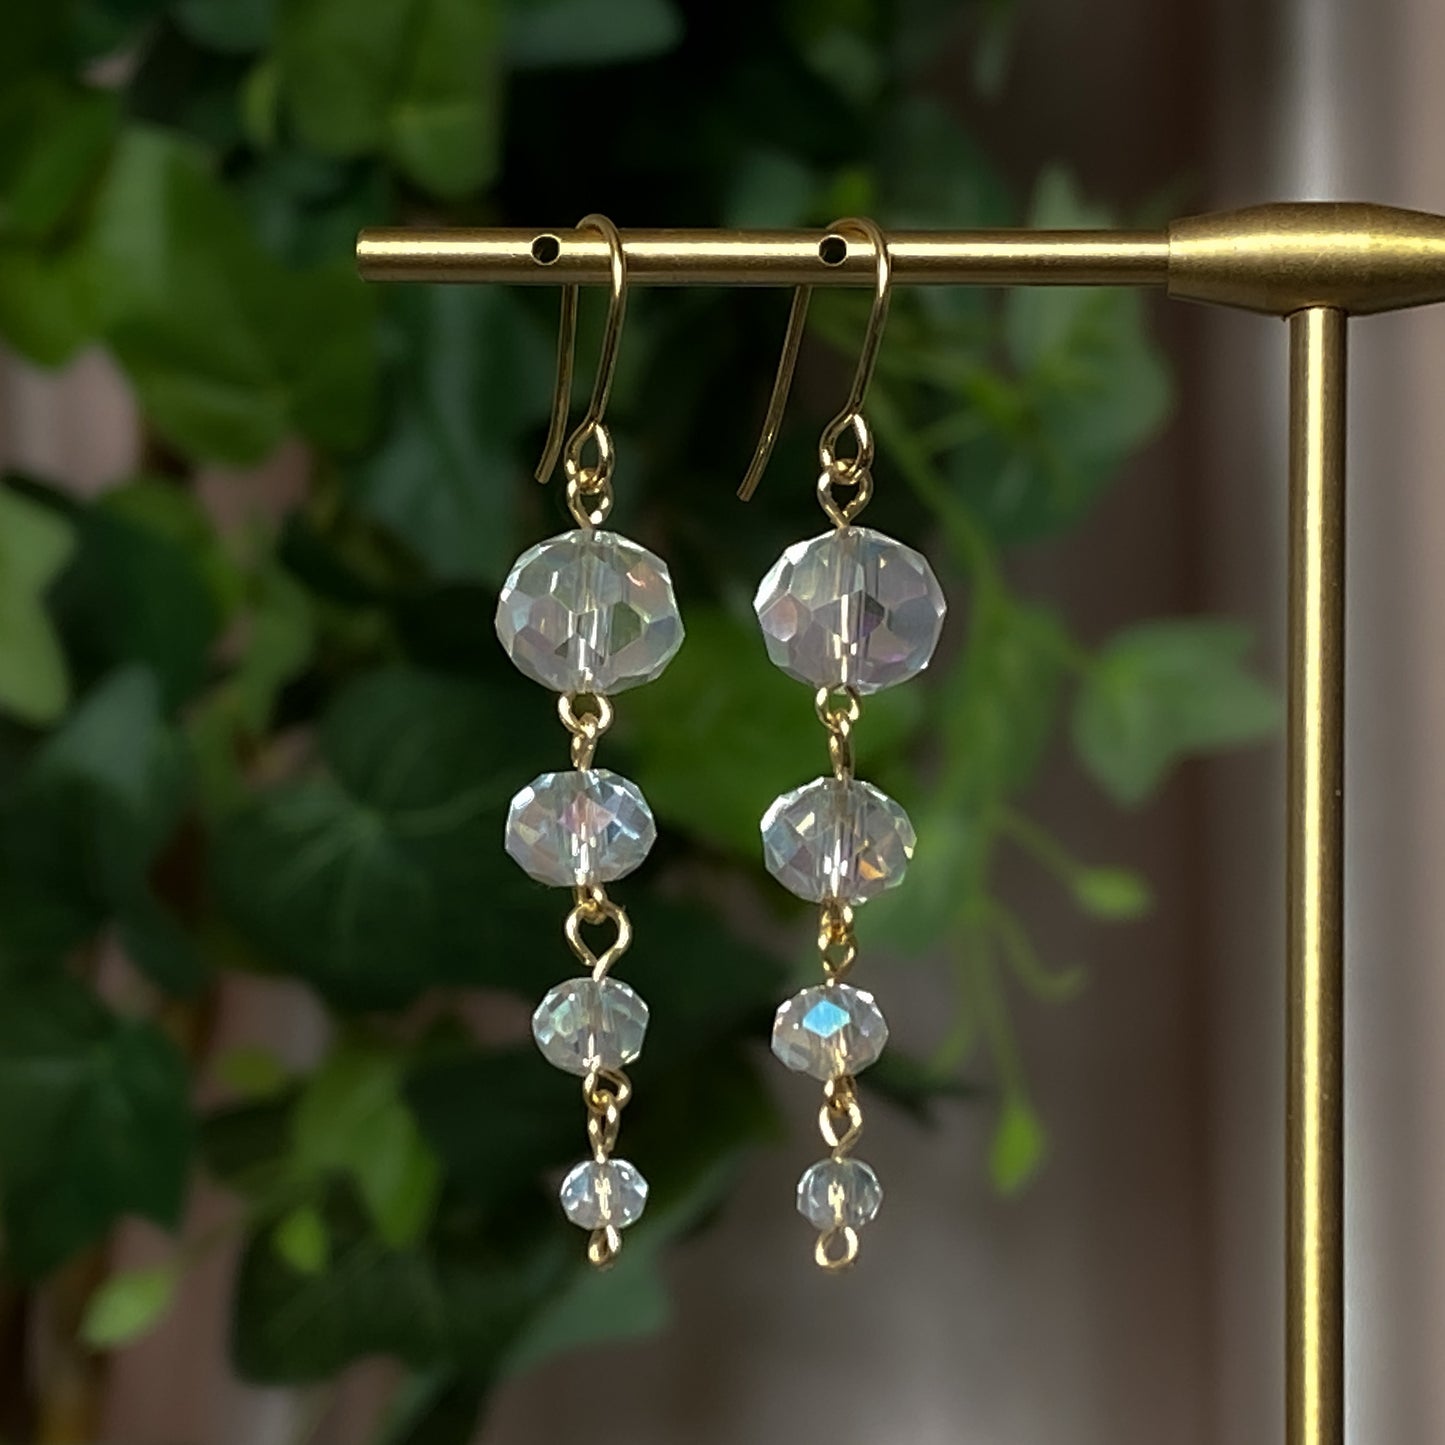 Make-Your-Own Graduated Bead Earring Kit